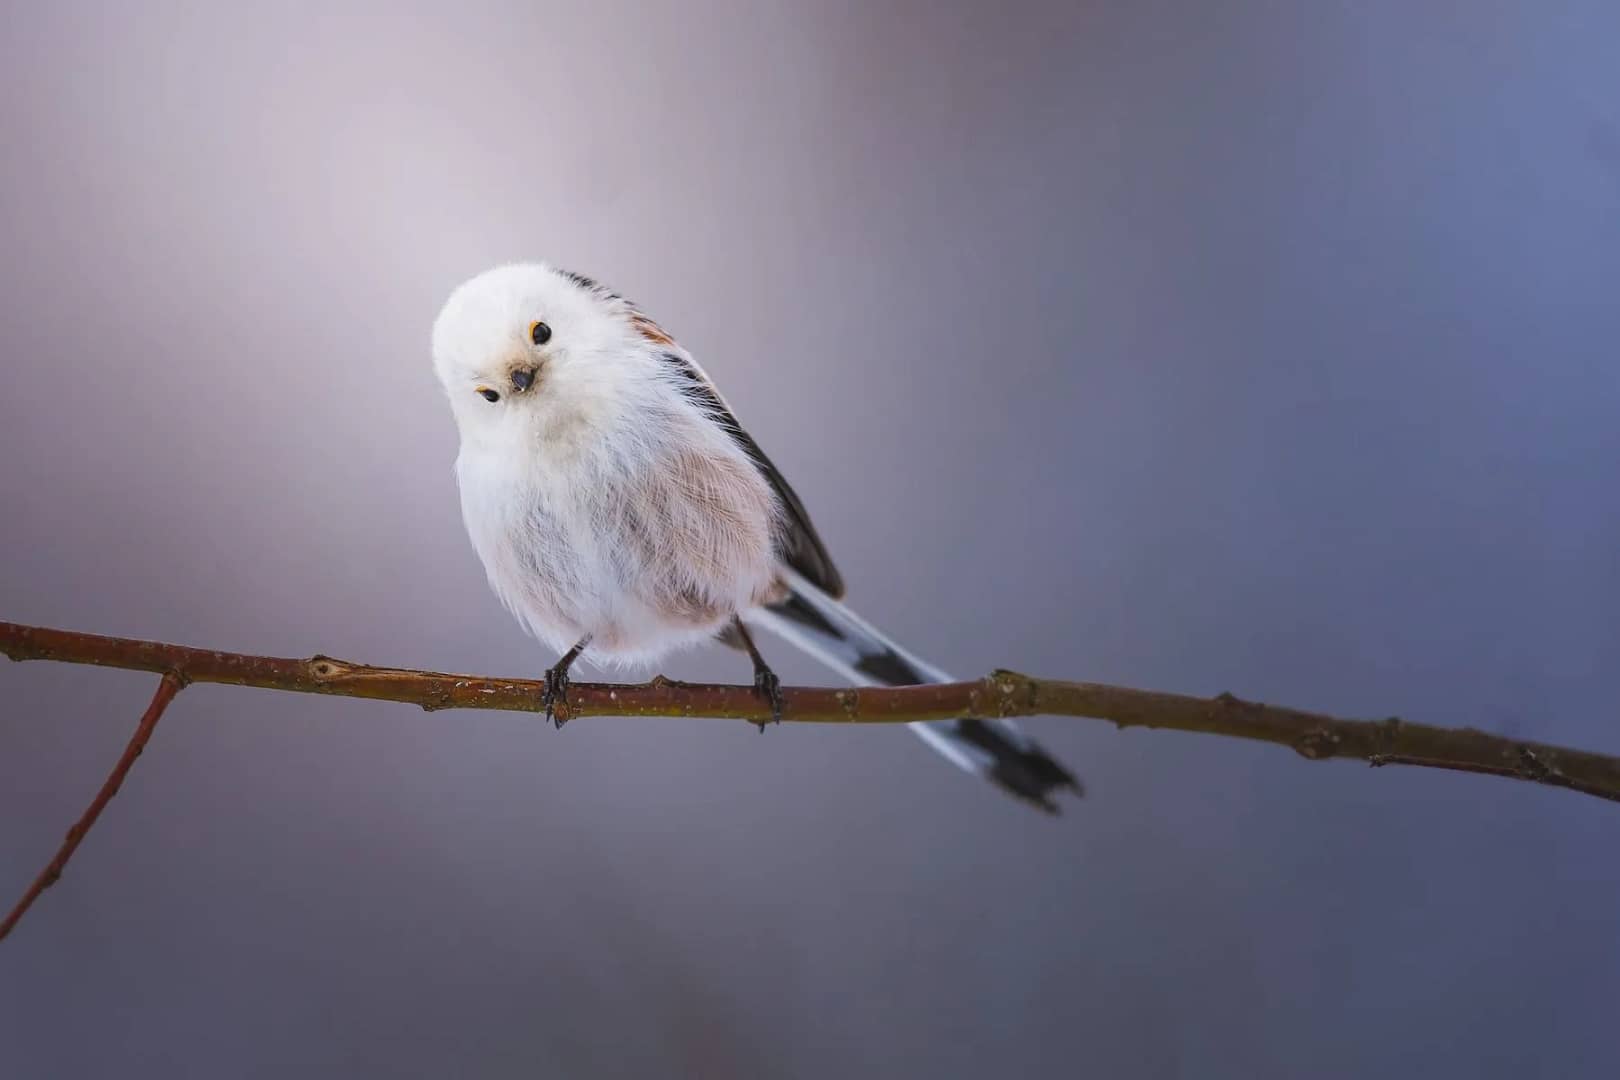 A long-tailed tit, a small, white and gray bird, cocks its head while perched on a branch, a nice sight while birdwatching for beginners